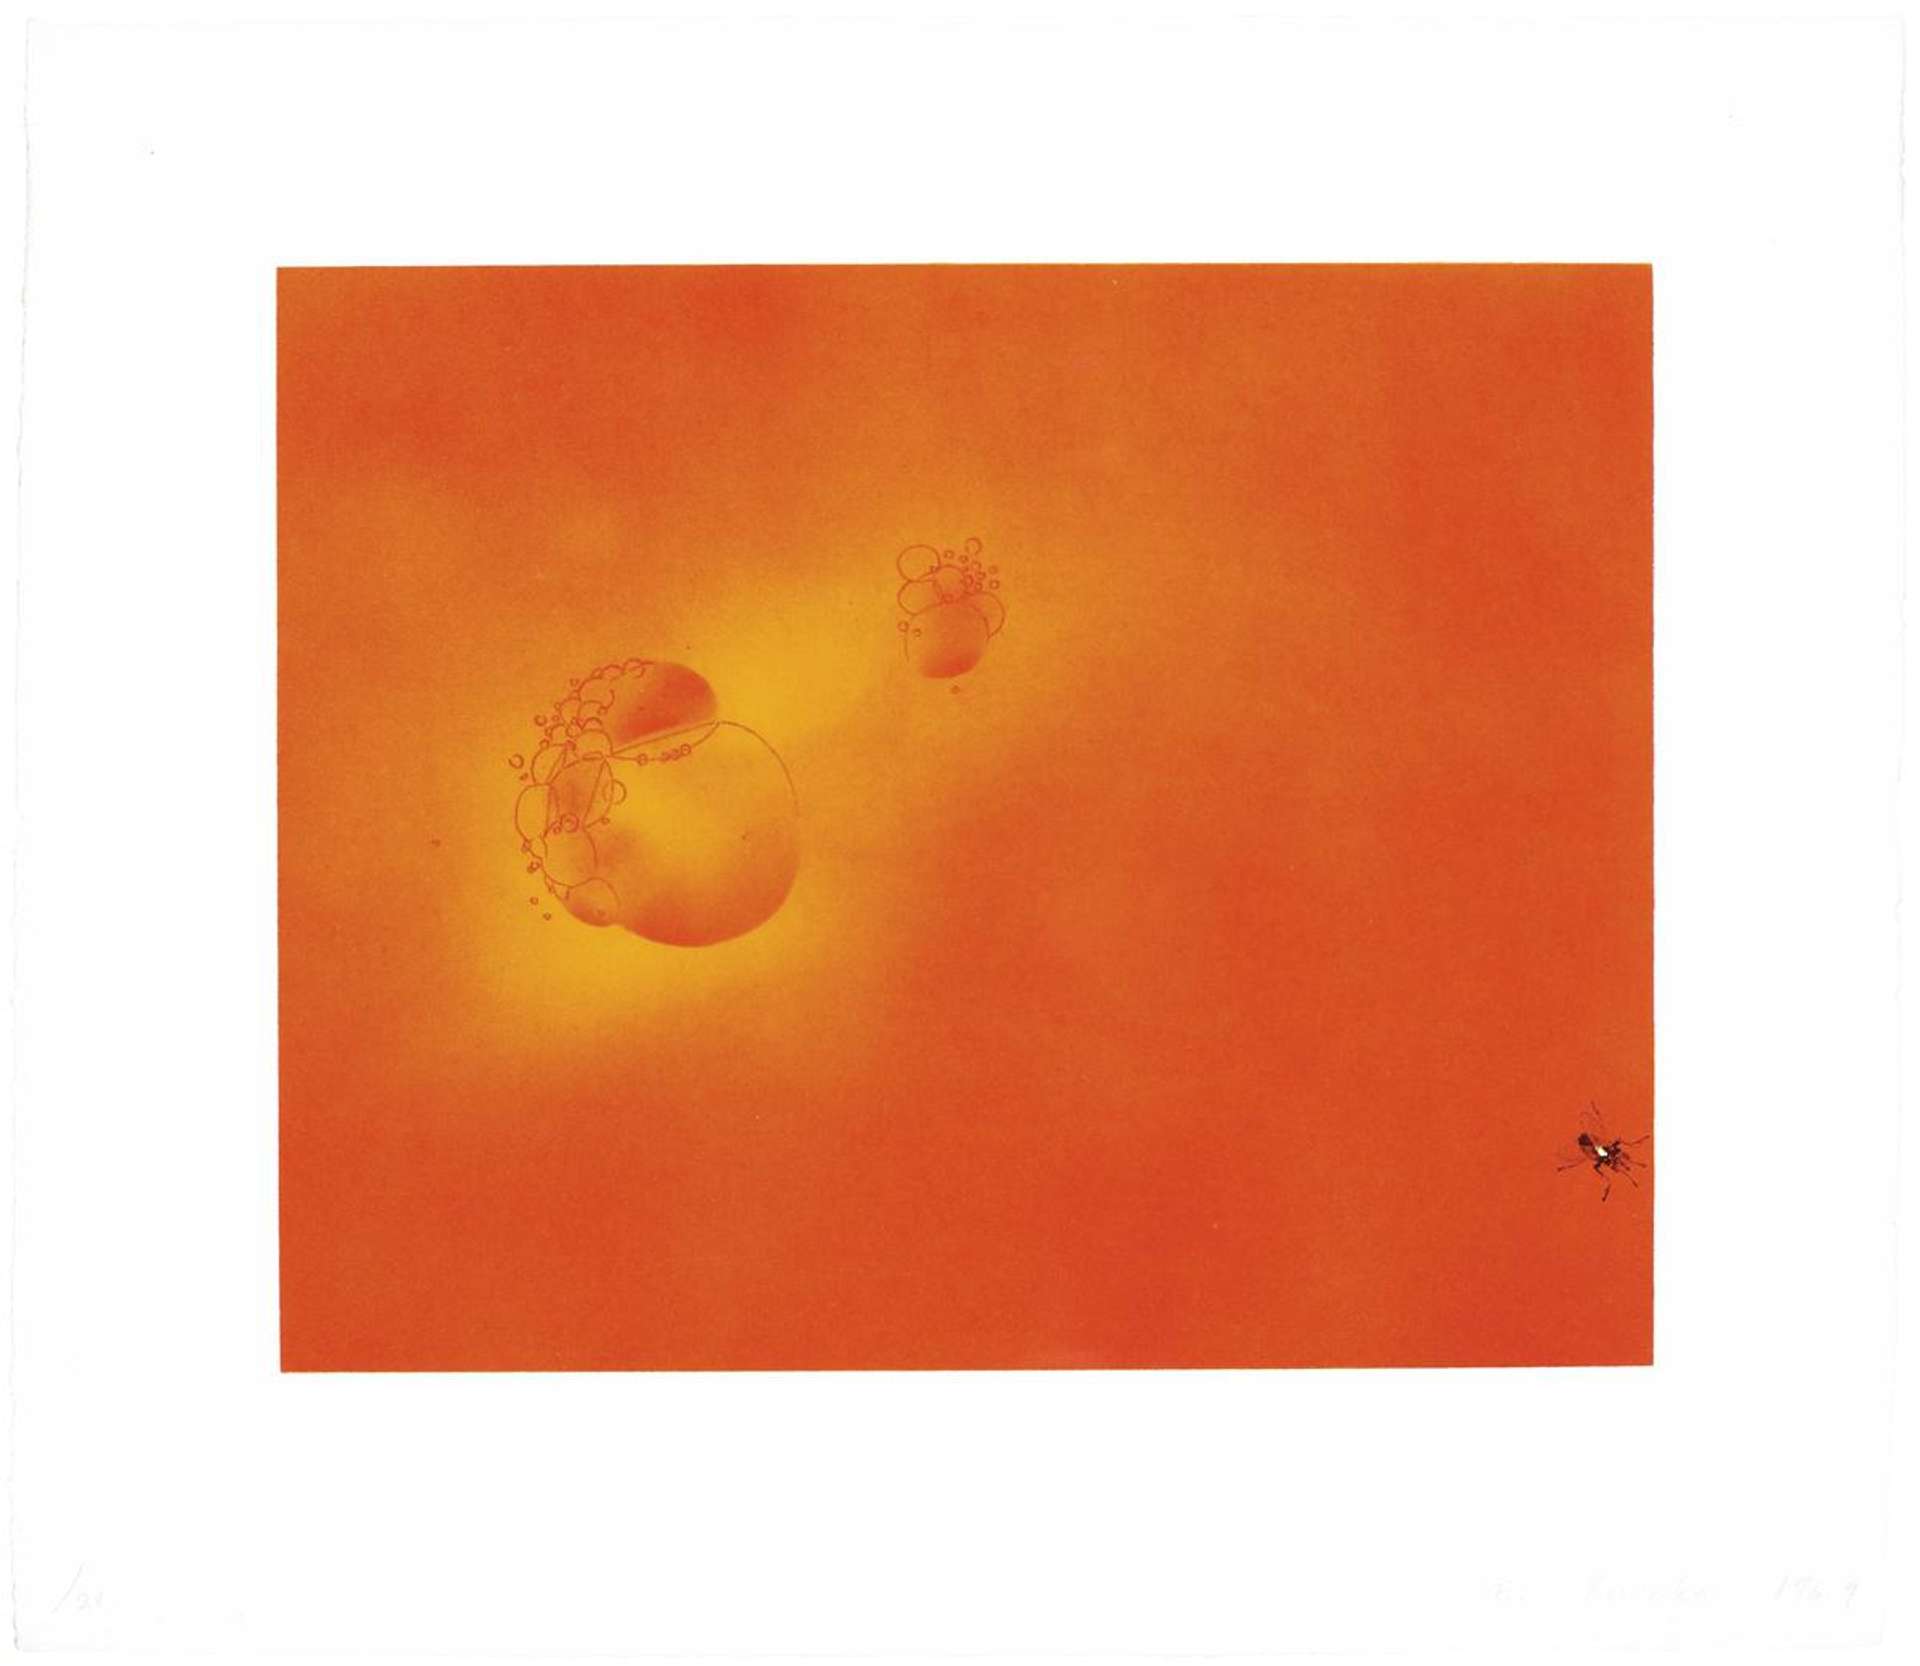 Ed Ruscha: Boiling Blood, Fly - Signed Print